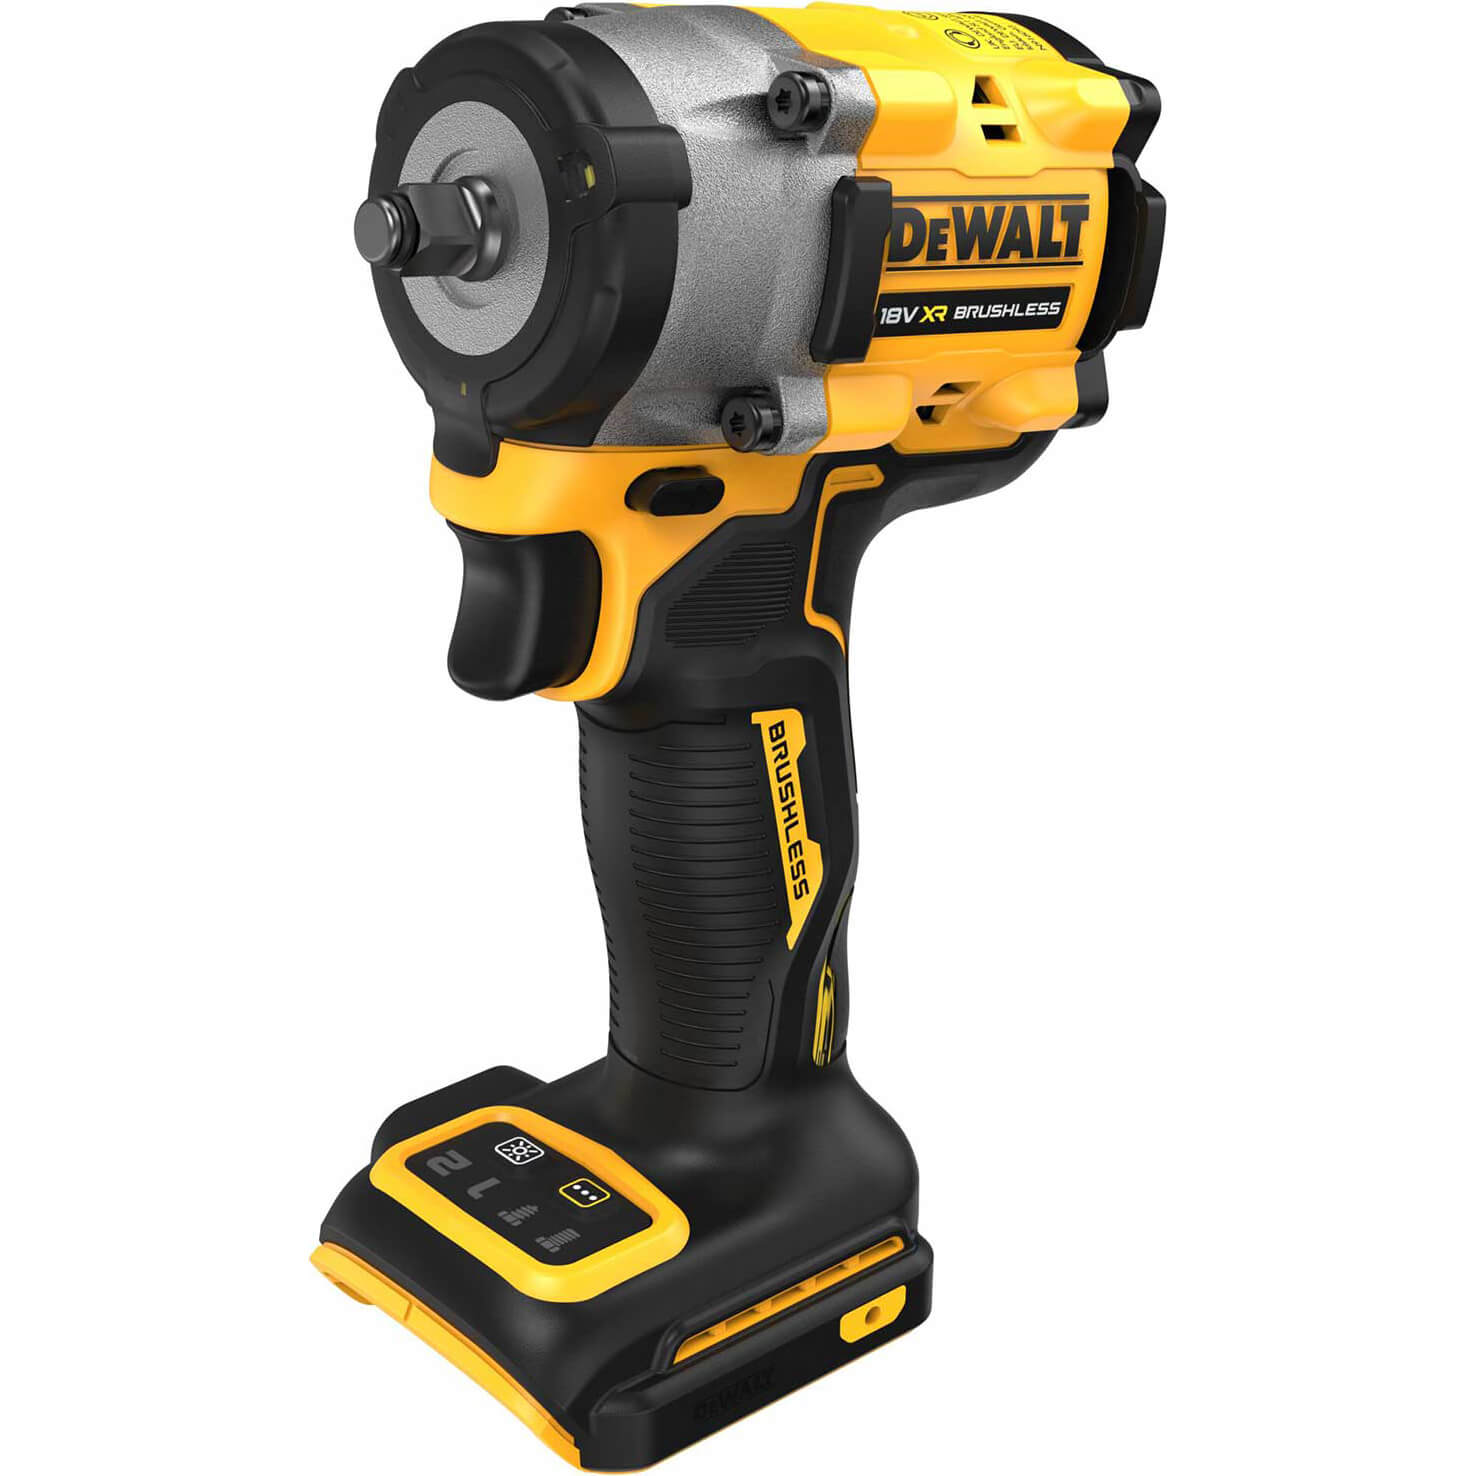 DeWalt DCF923 18v XR Cordless Brushless 3/8" Compact Impact Wrench No Batteries No Charger No Case